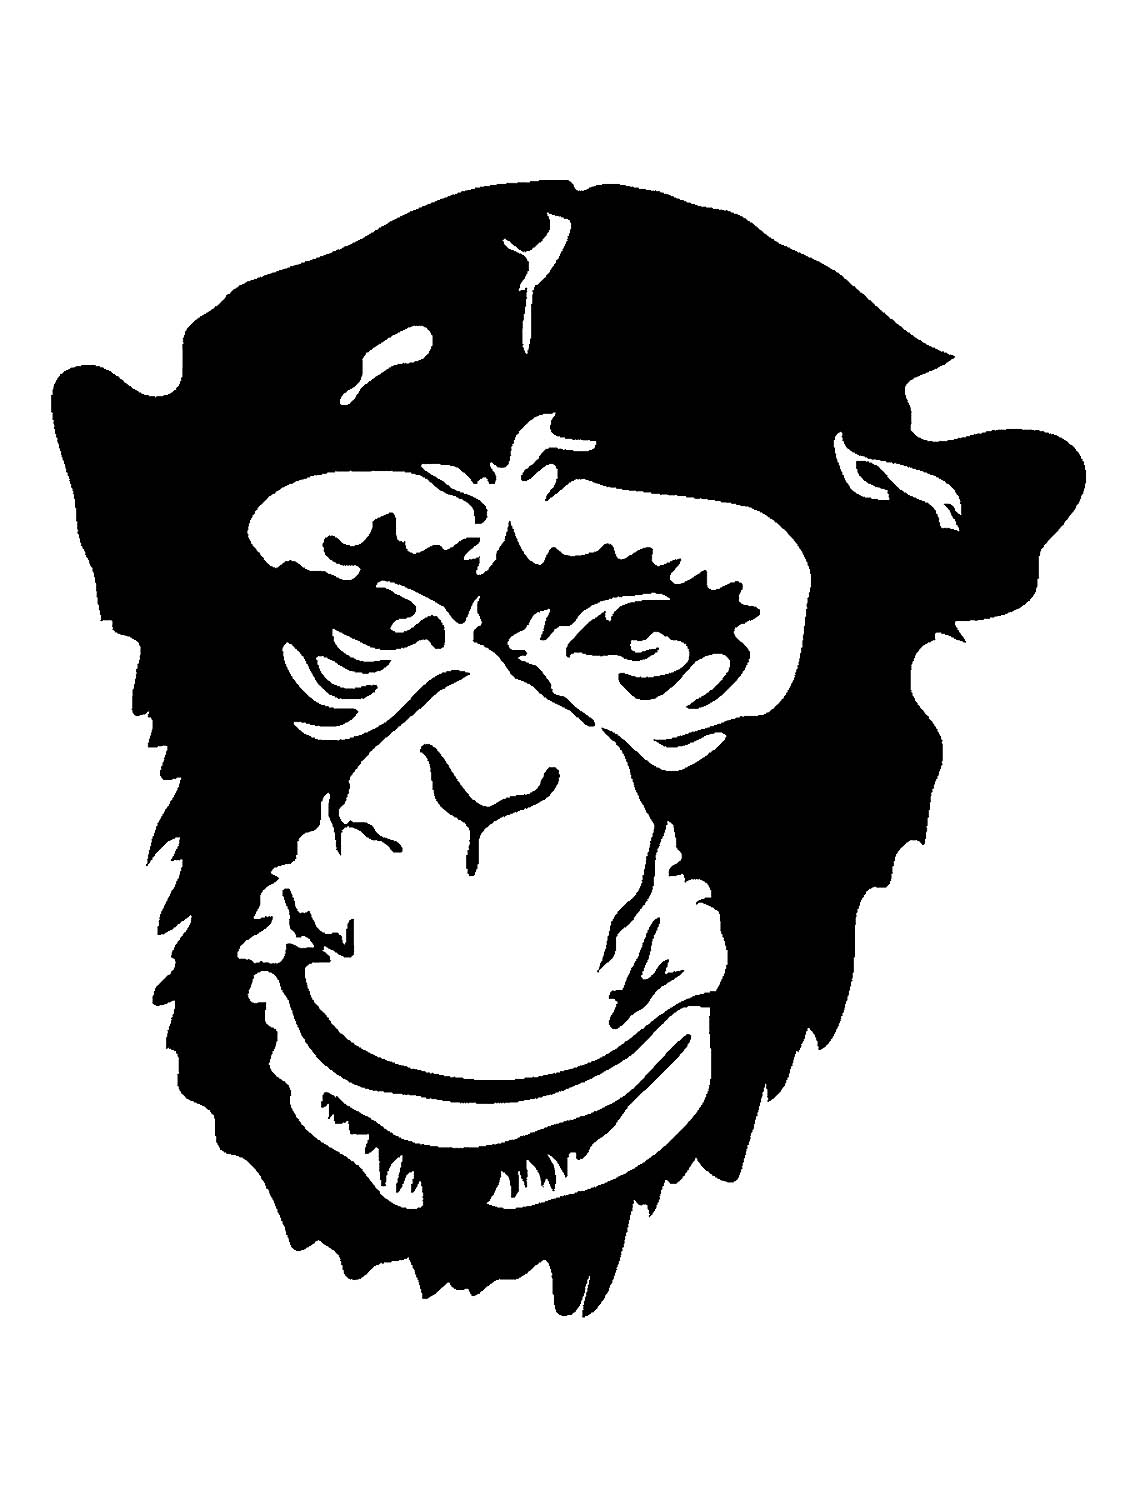 Monkey stencils - Free stencils and template cutout printable